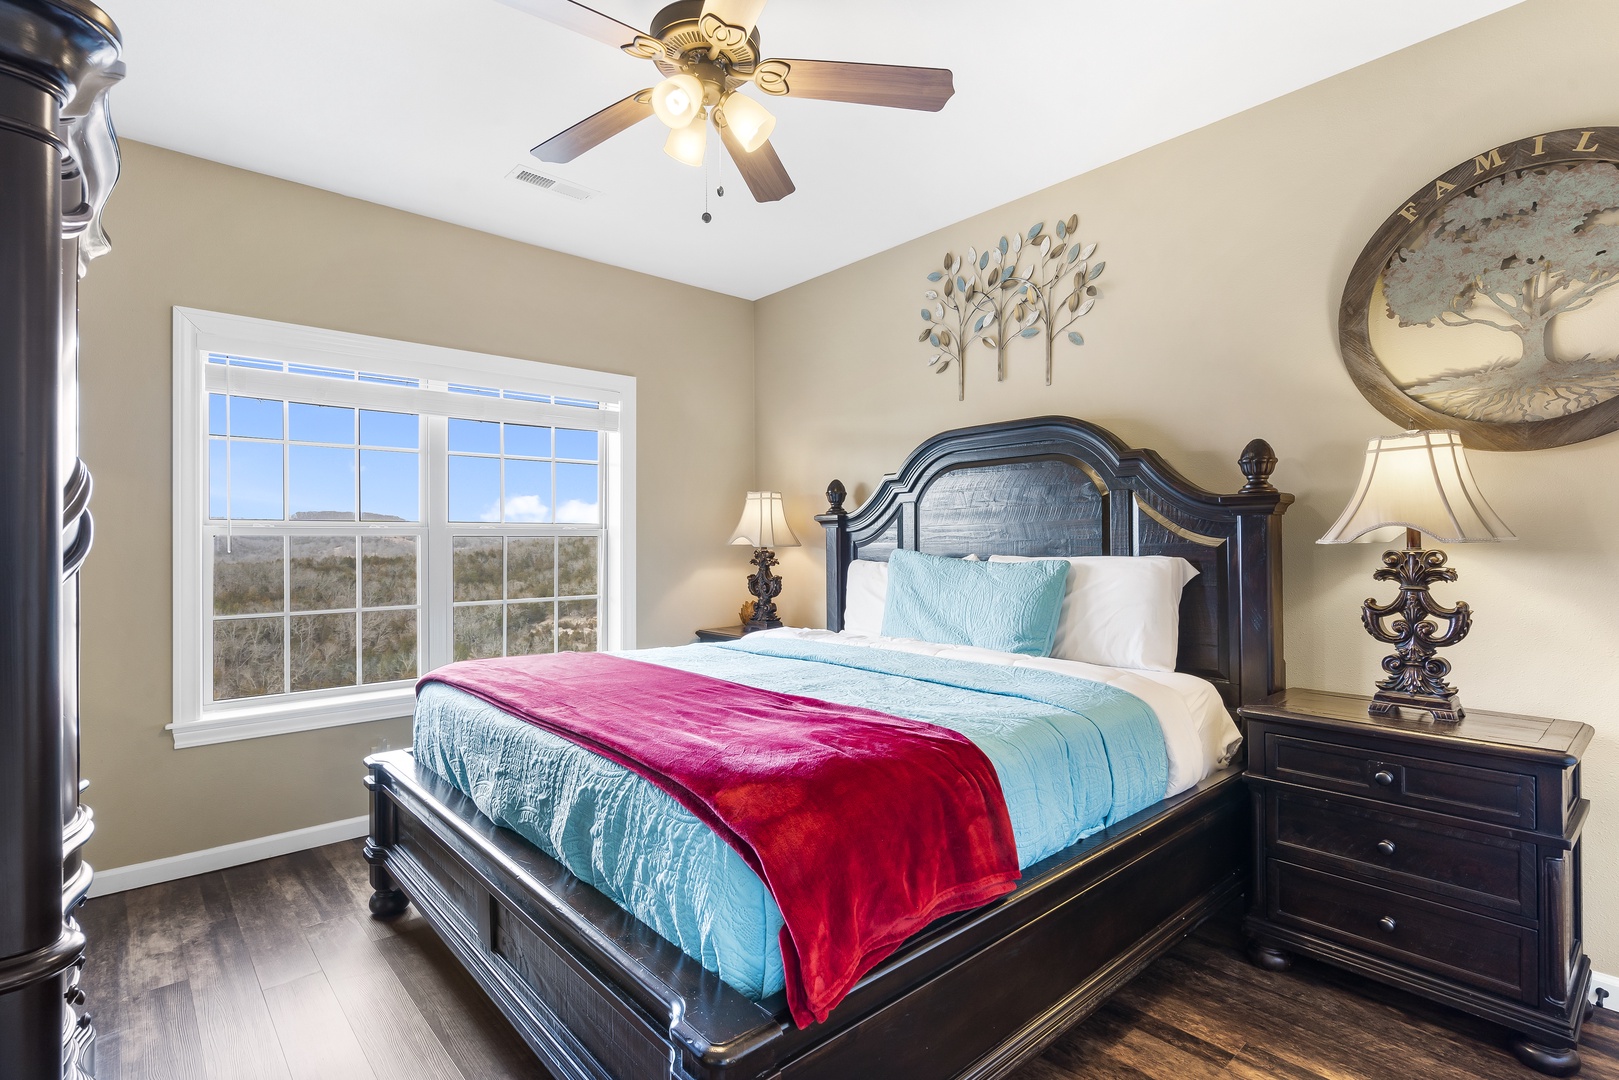 The master suite showcases a regal king bed, private ensuite, & TV